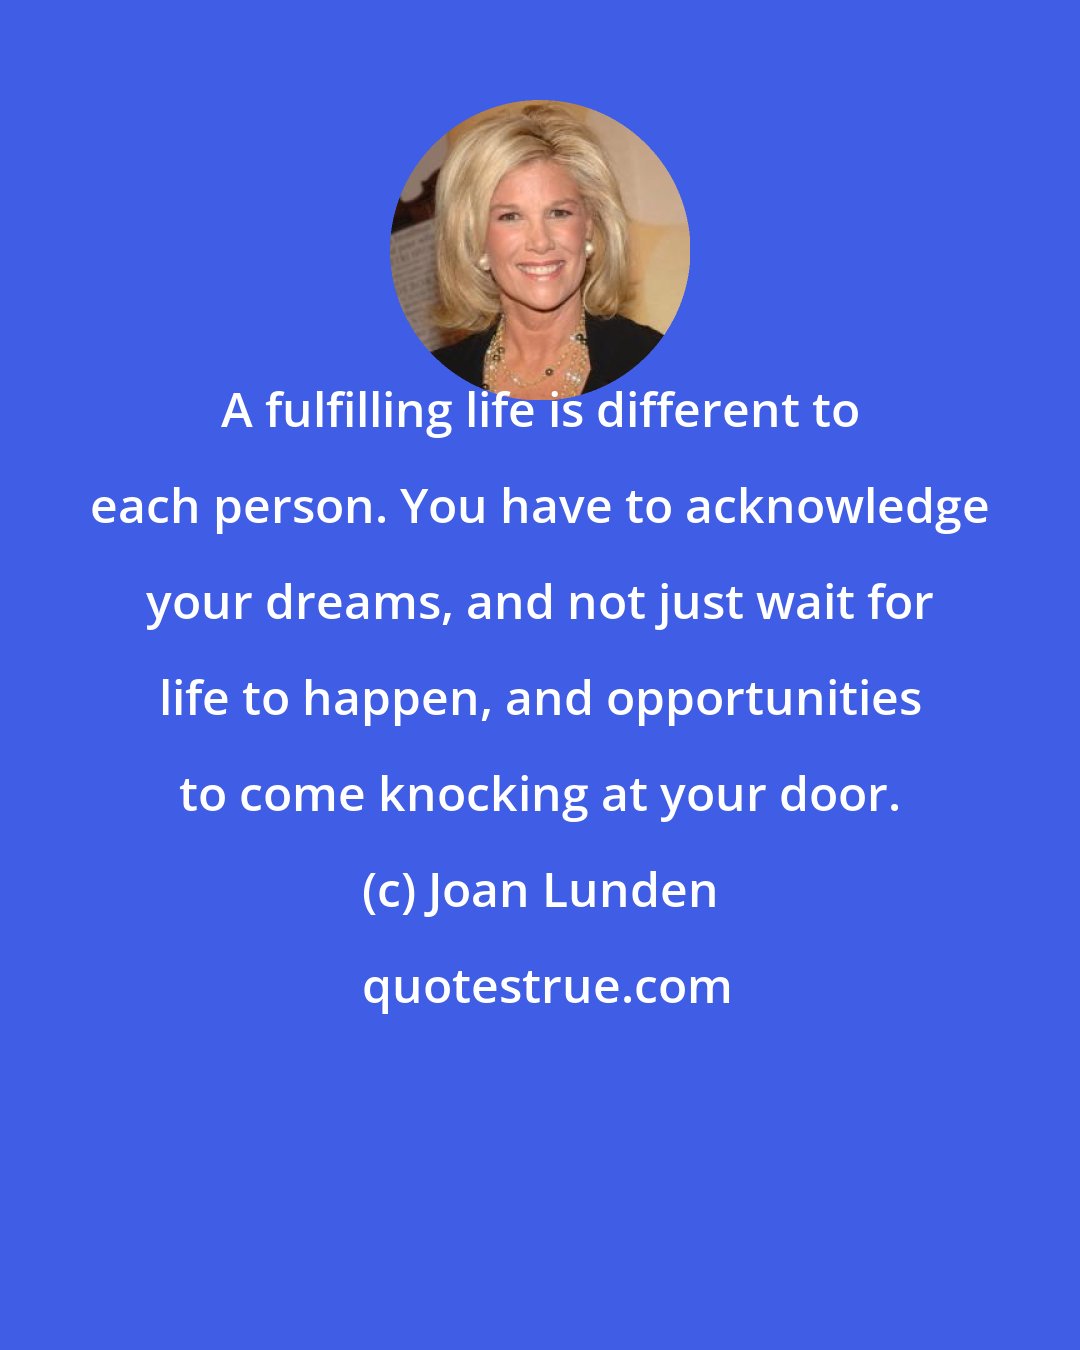 Joan Lunden: A fulfilling life is different to each person. You have to acknowledge your dreams, and not just wait for life to happen, and opportunities to come knocking at your door.